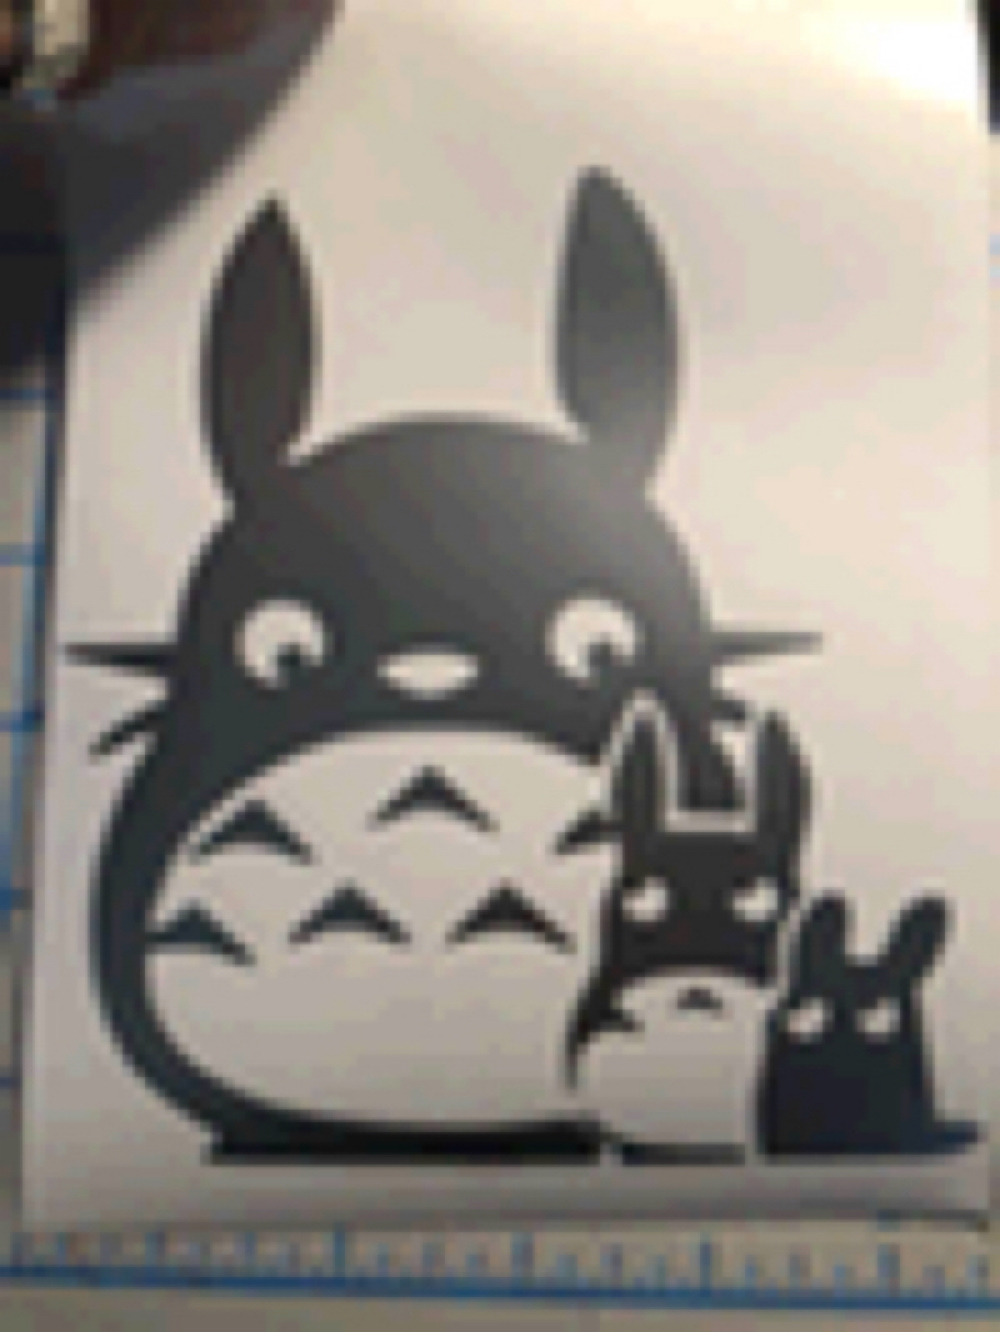 Cute|Totoro Family|Dust Bunny|Vinyl|Decal|You Pick Color